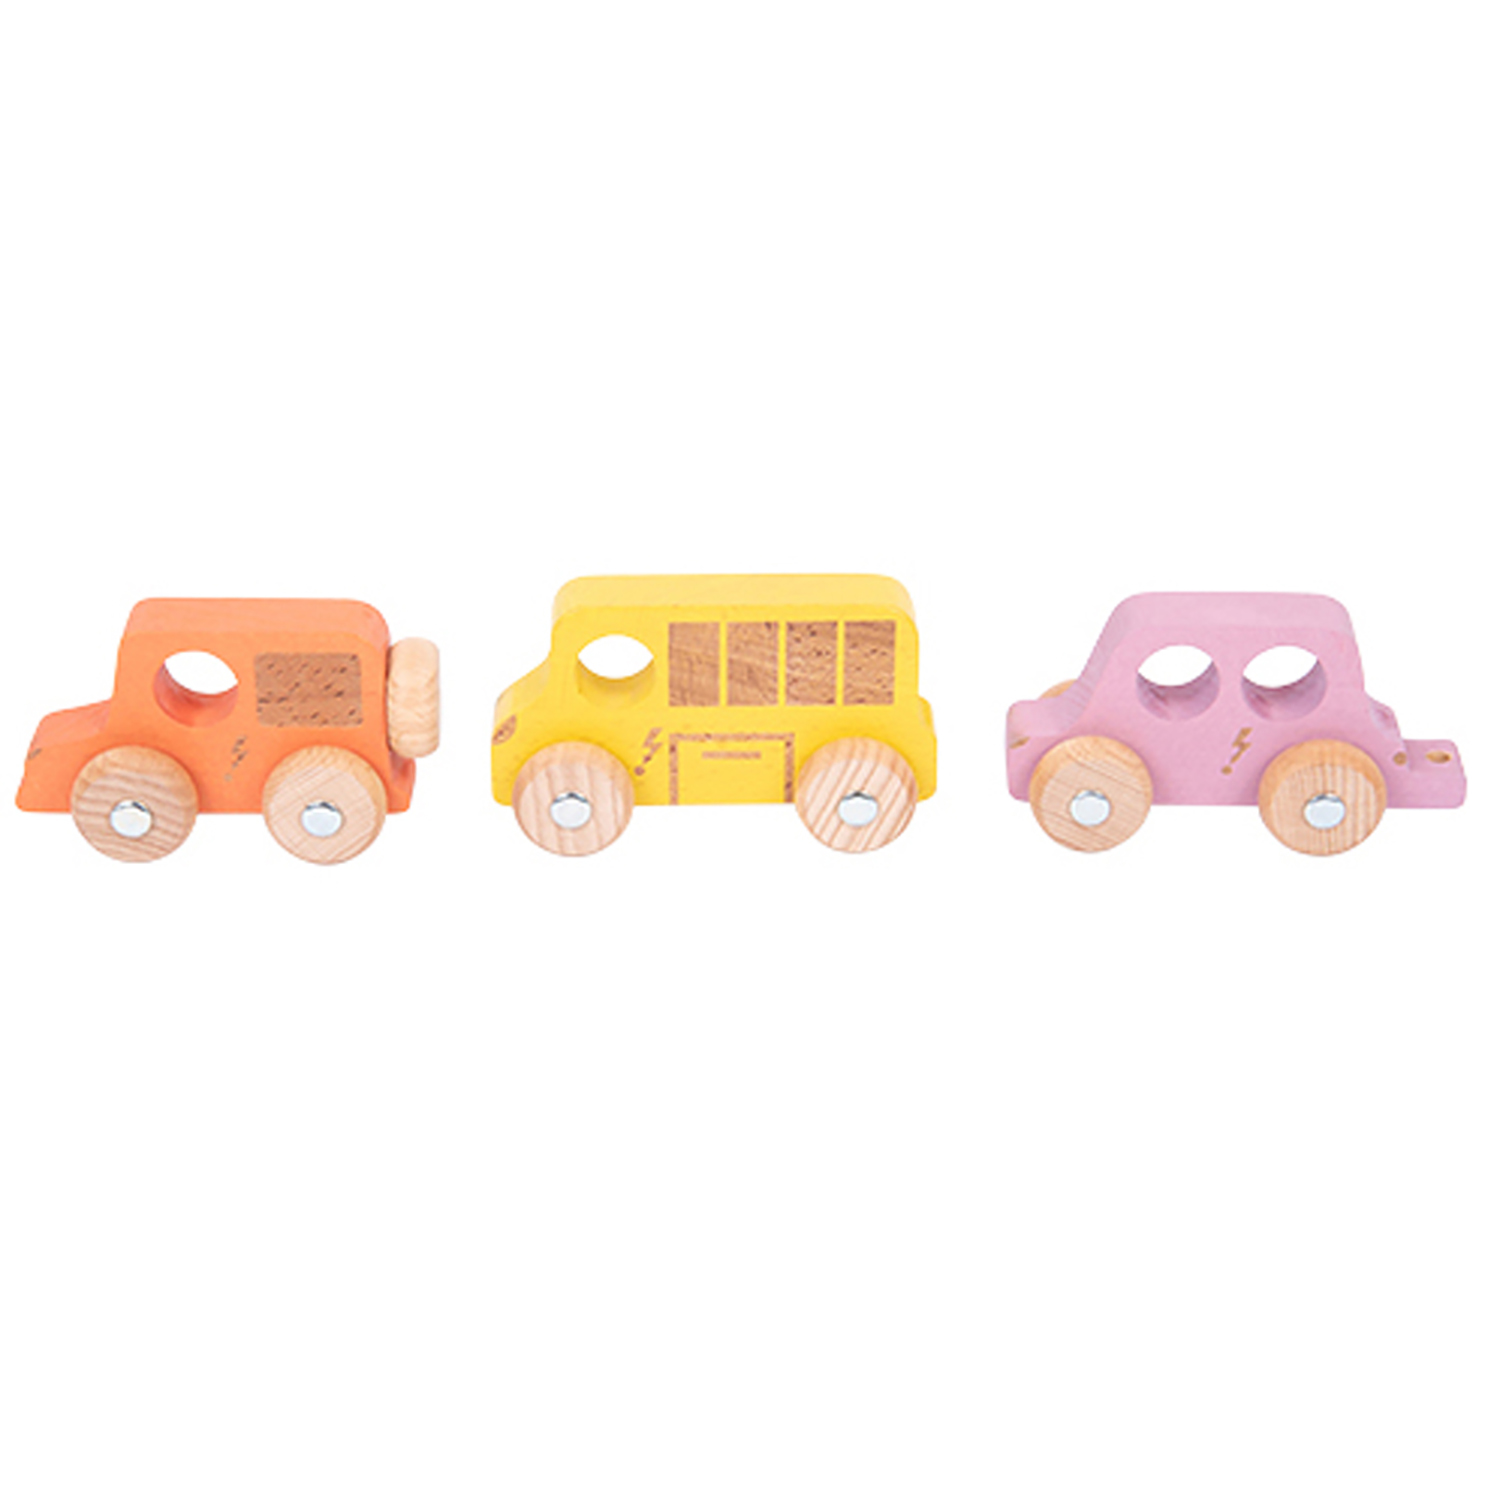 TickiT Rainbow Wooden City E-Vehicles - Set of 3 image number null